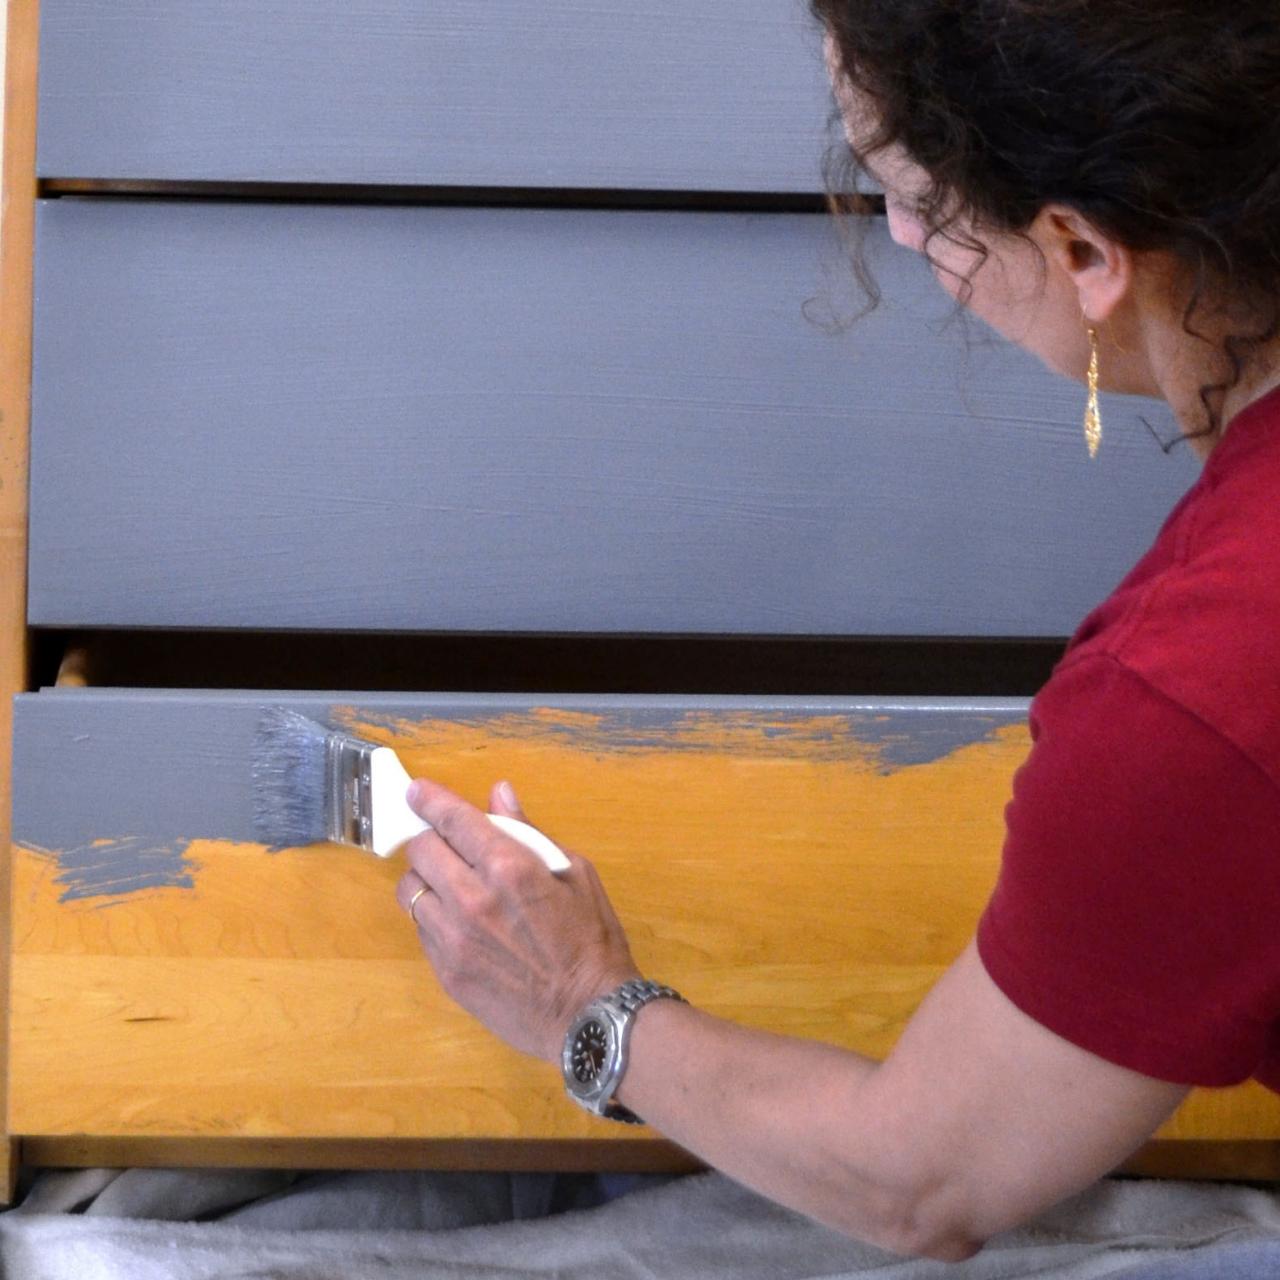 How To Paint or Stain Furniture Using a Paint Sprayer